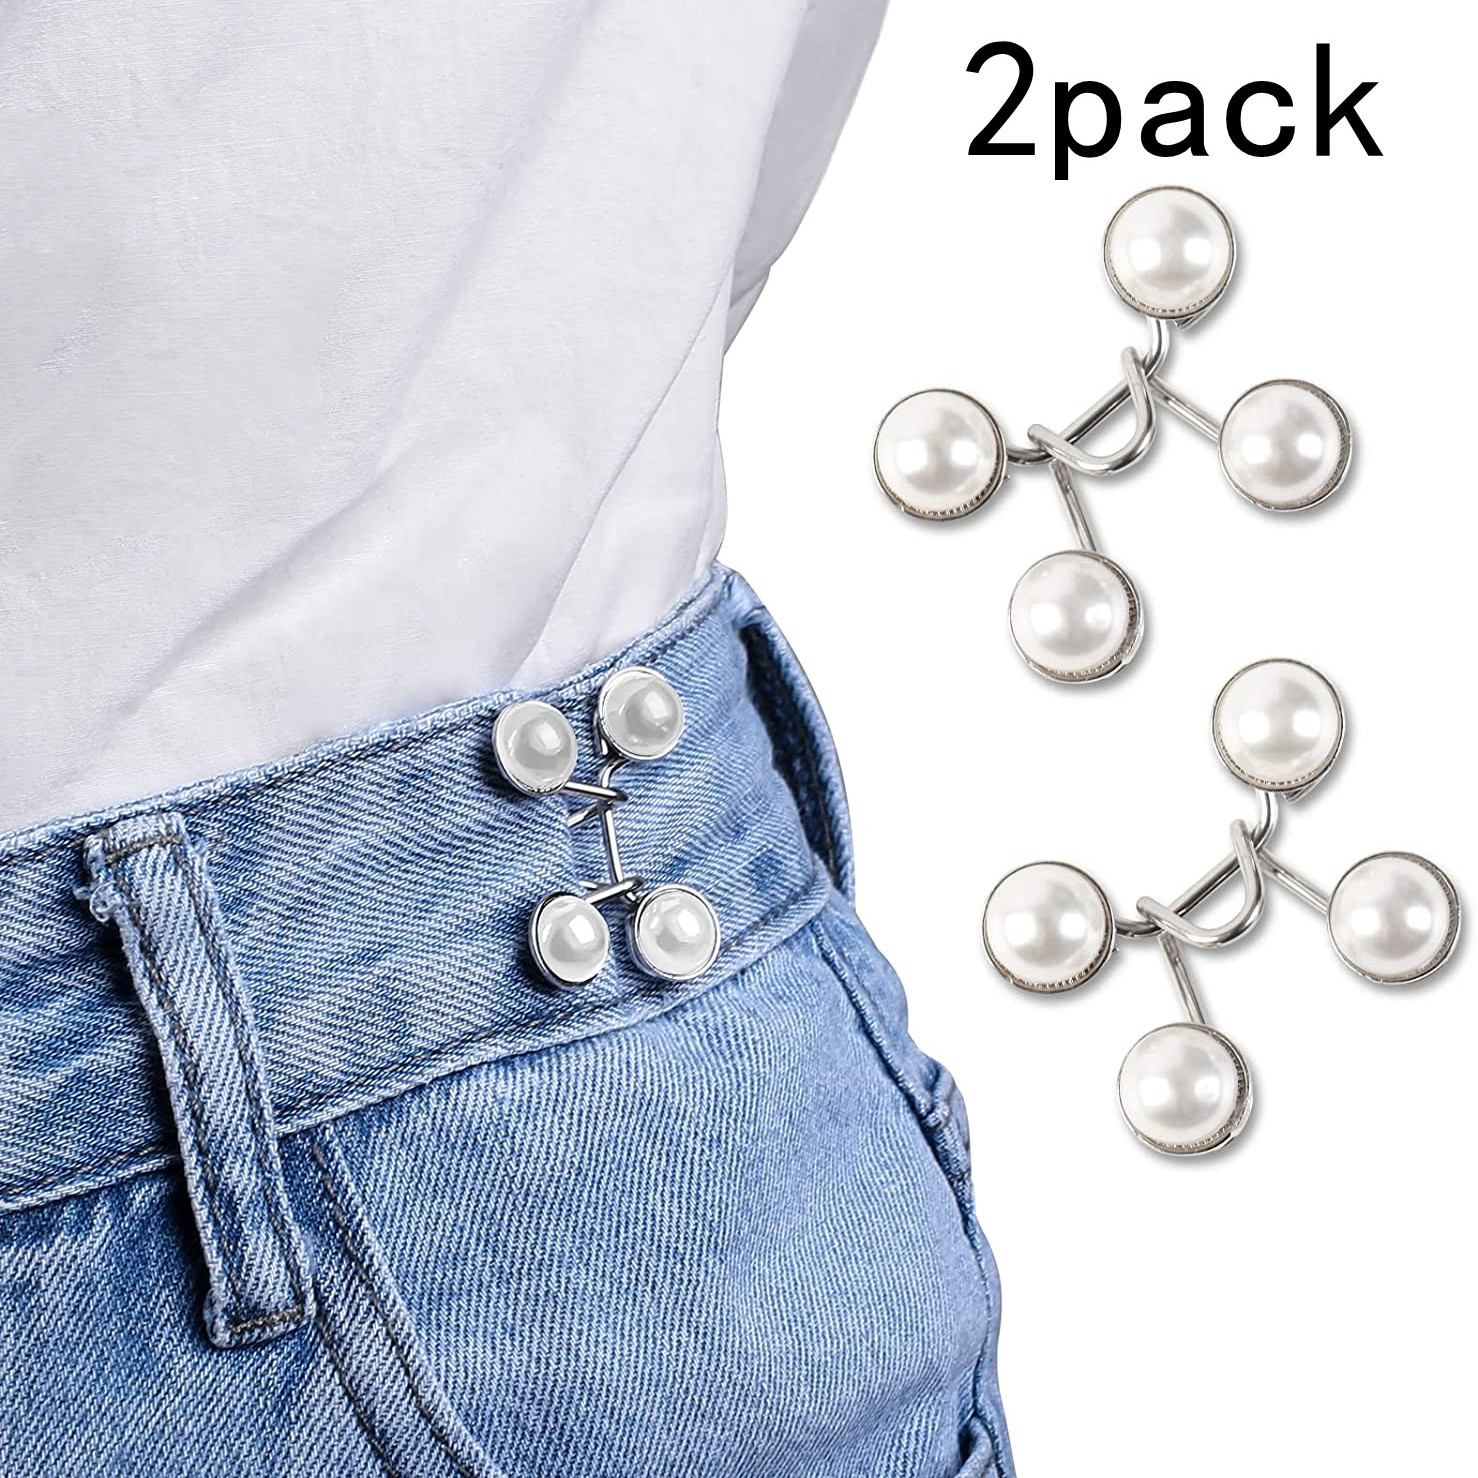 1PC Adjustable Pant Waist Tightener - No Sewing Required Jean Button Pins  for Women and Men - Easily Adjust Waistband for Perfect Fit,Detachable Zinc  Alloy Waist Button, Minimalist Round Decor Adjustable Jeans